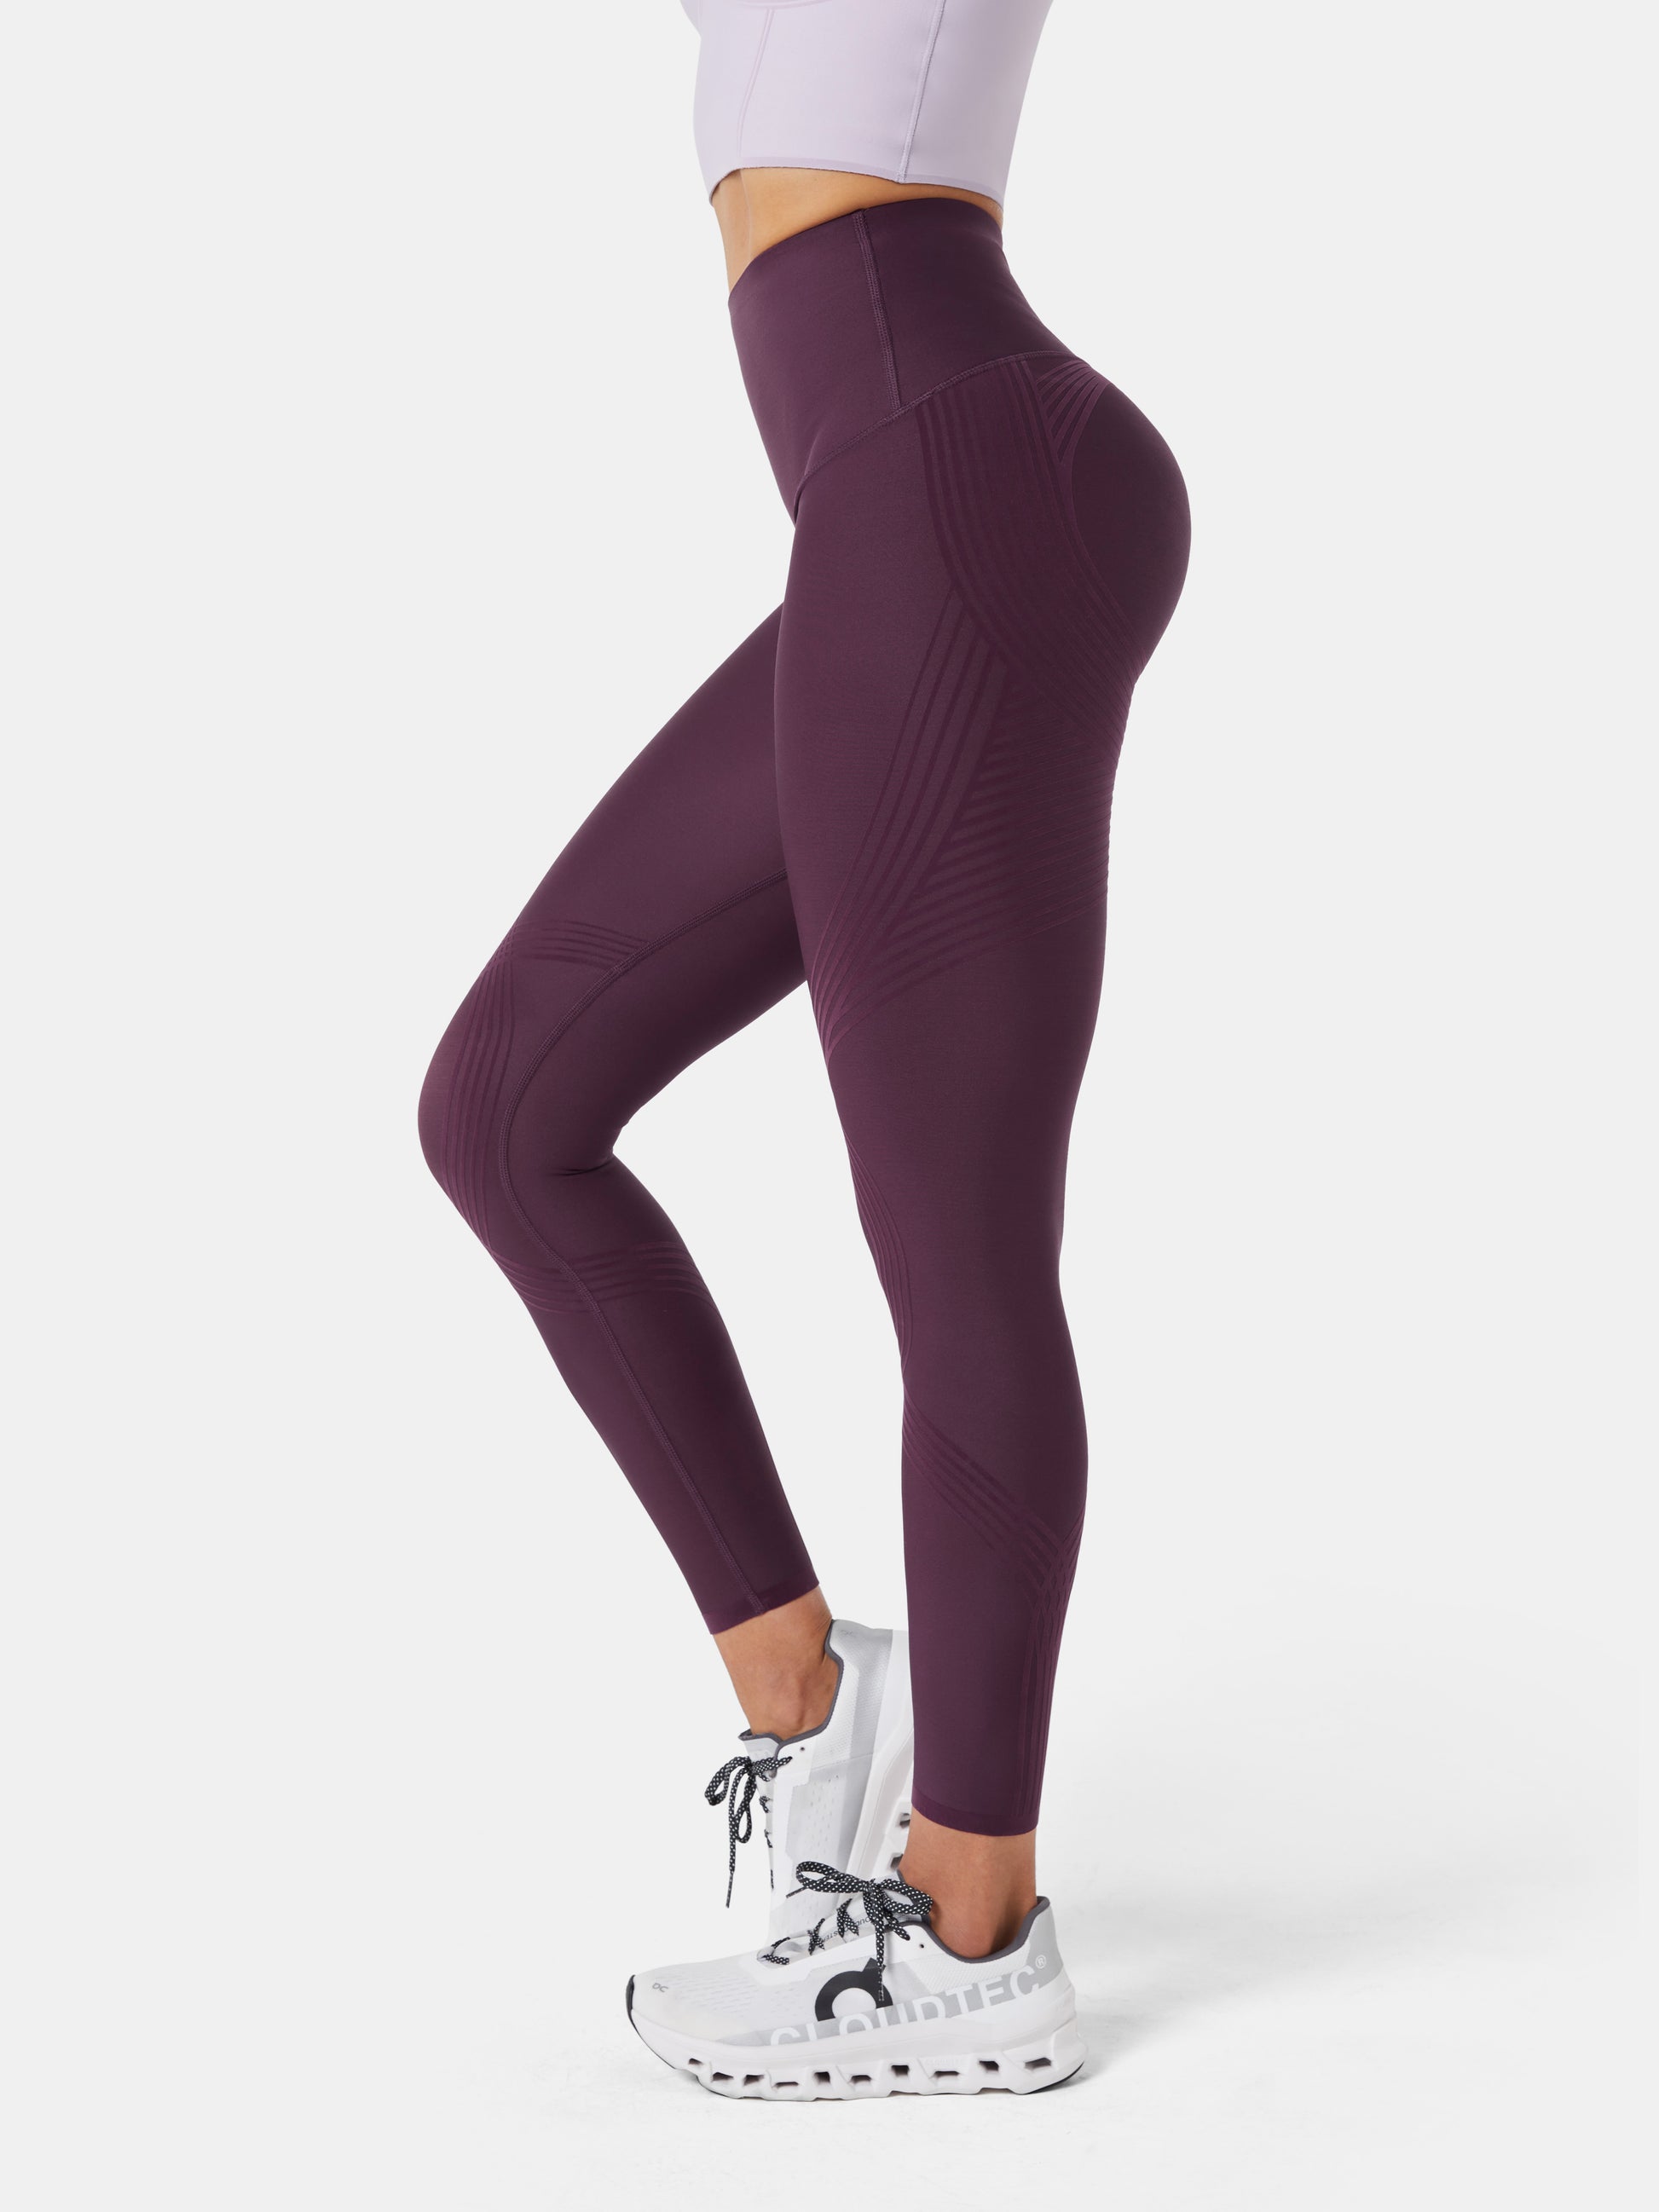 Blue Moon Legging  Womens workout outfits, Outfits with leggings